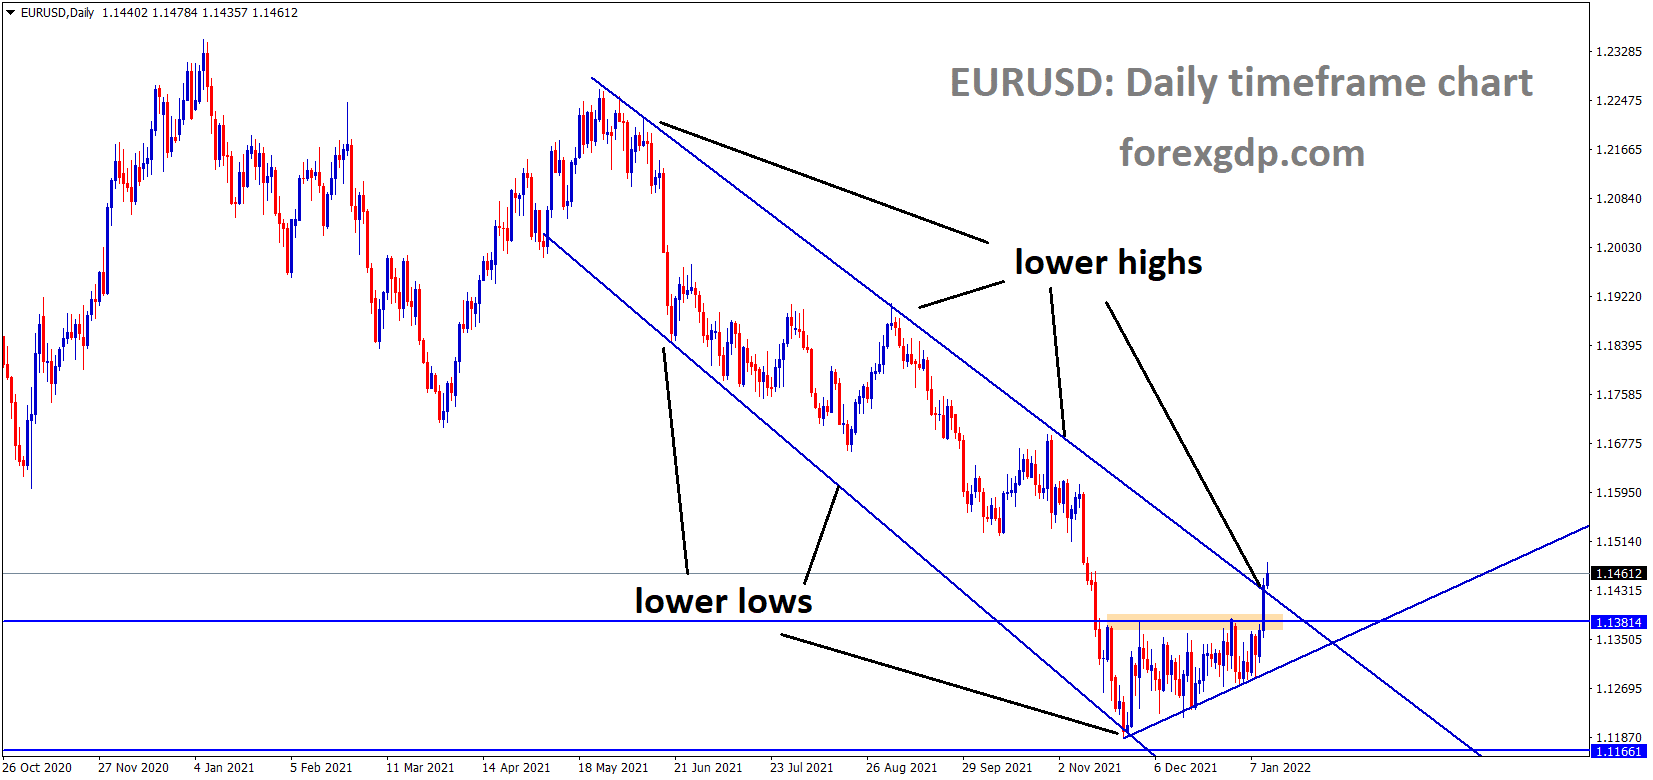 EURUSD is moving in the Descending channel and the market has reached the lower high area of the channel.